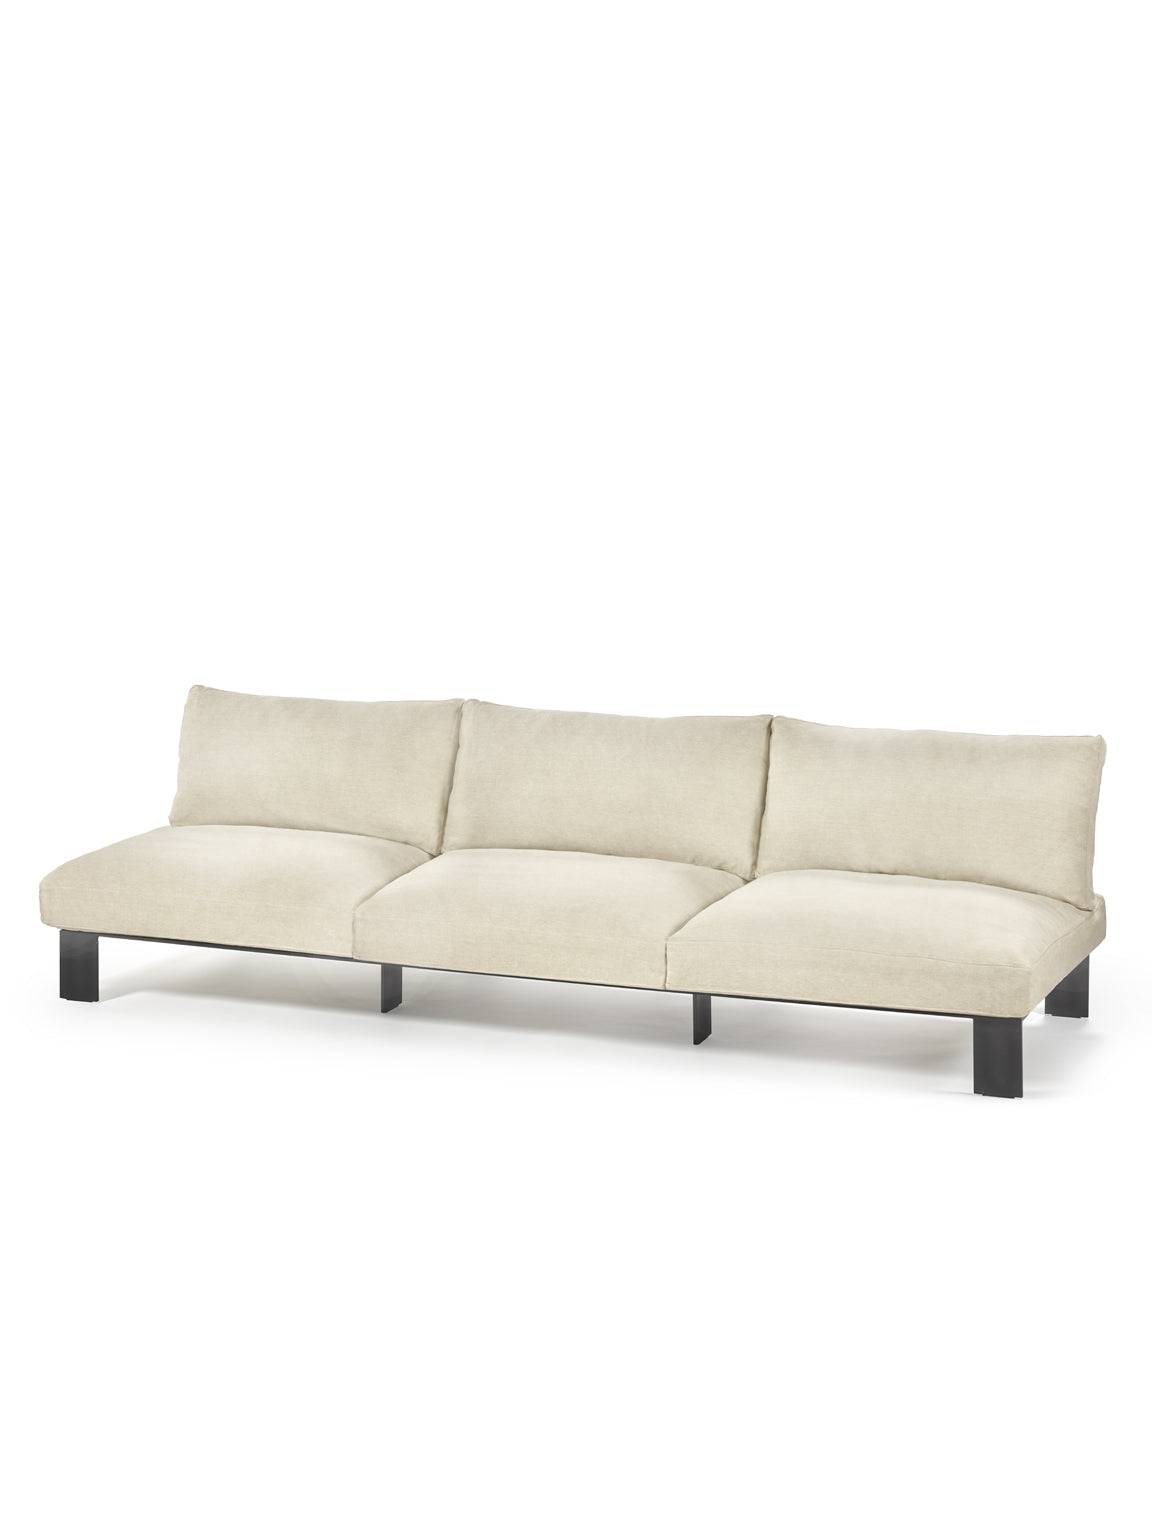 Mombaers Outdoor Sofa - Chalk - THAT COOL LIVING